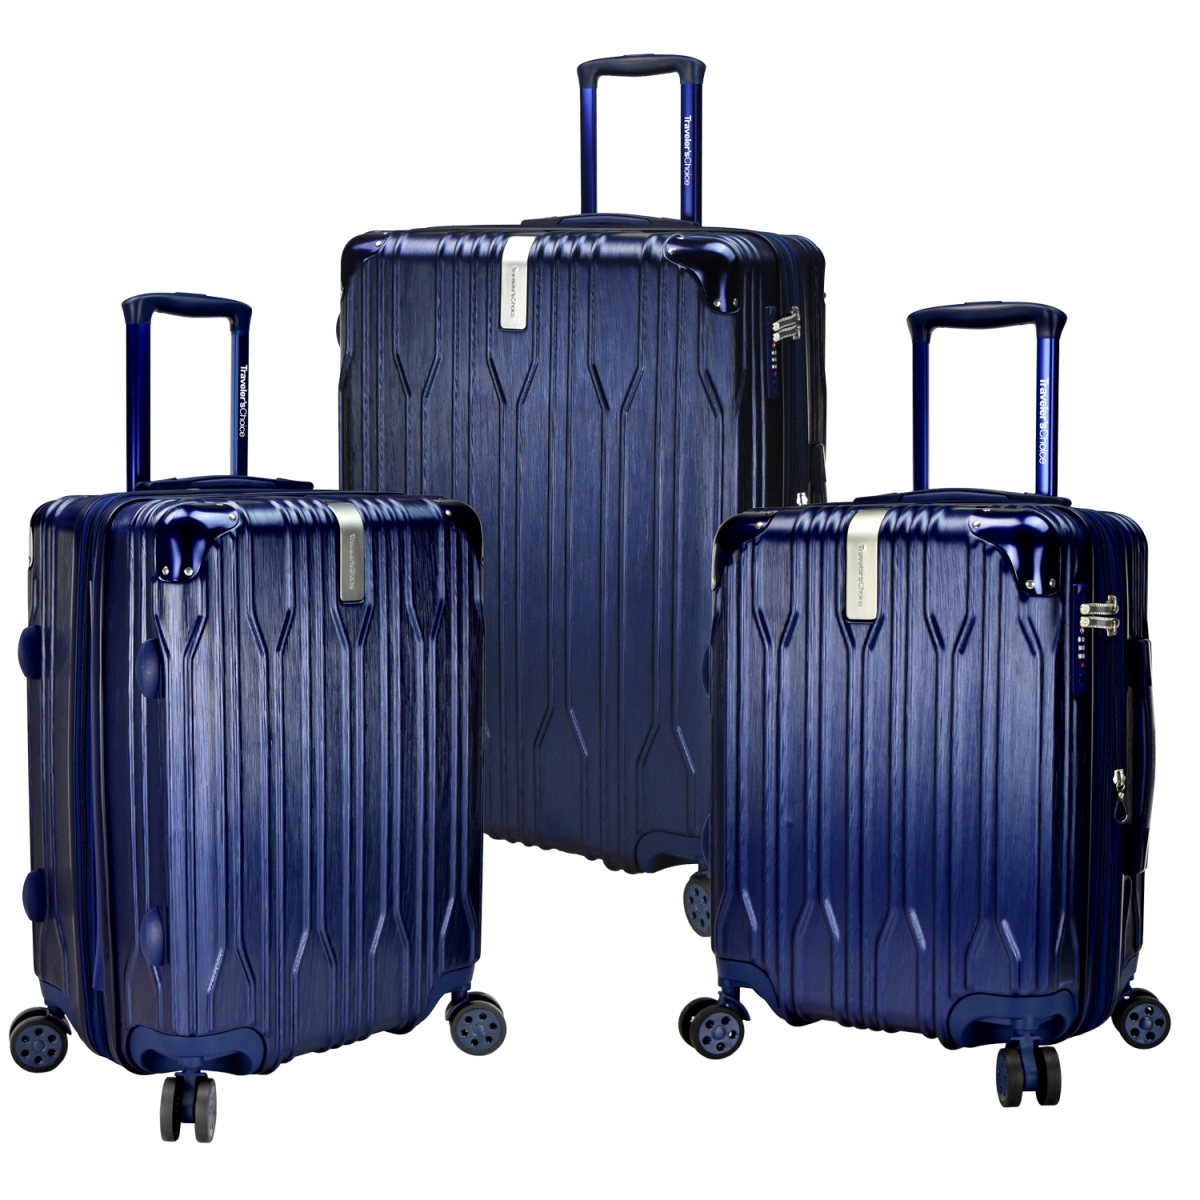 Travelers Choice Tc09035n Bell Weather Expandable 3 Piece Spinner Luggage Set, Dark Blue